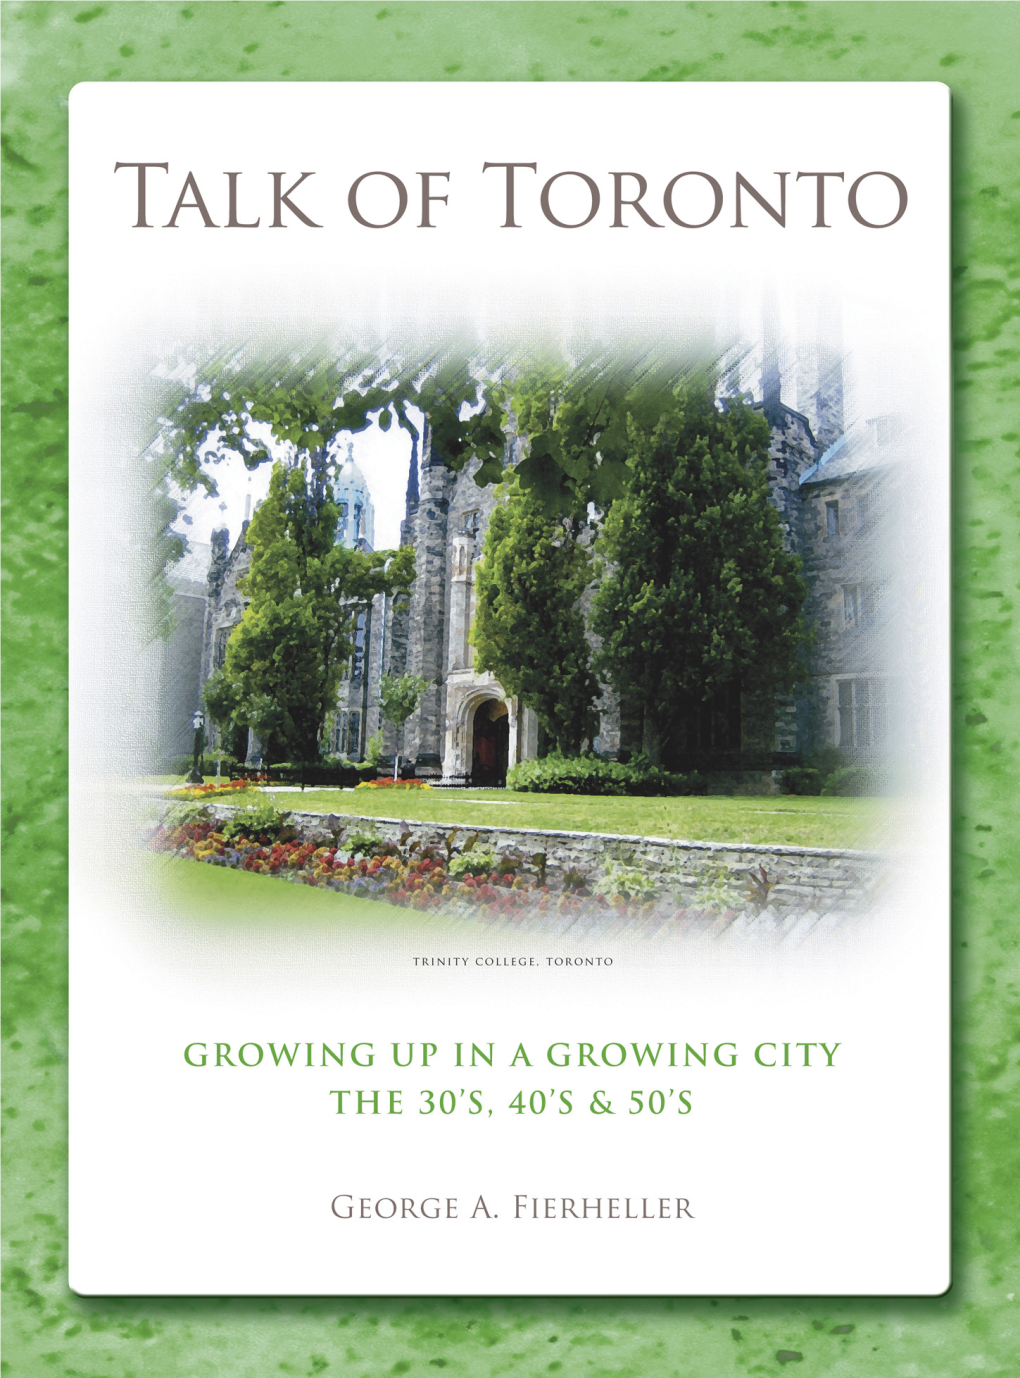 Talk of Toronto – Growing up in a Growing City